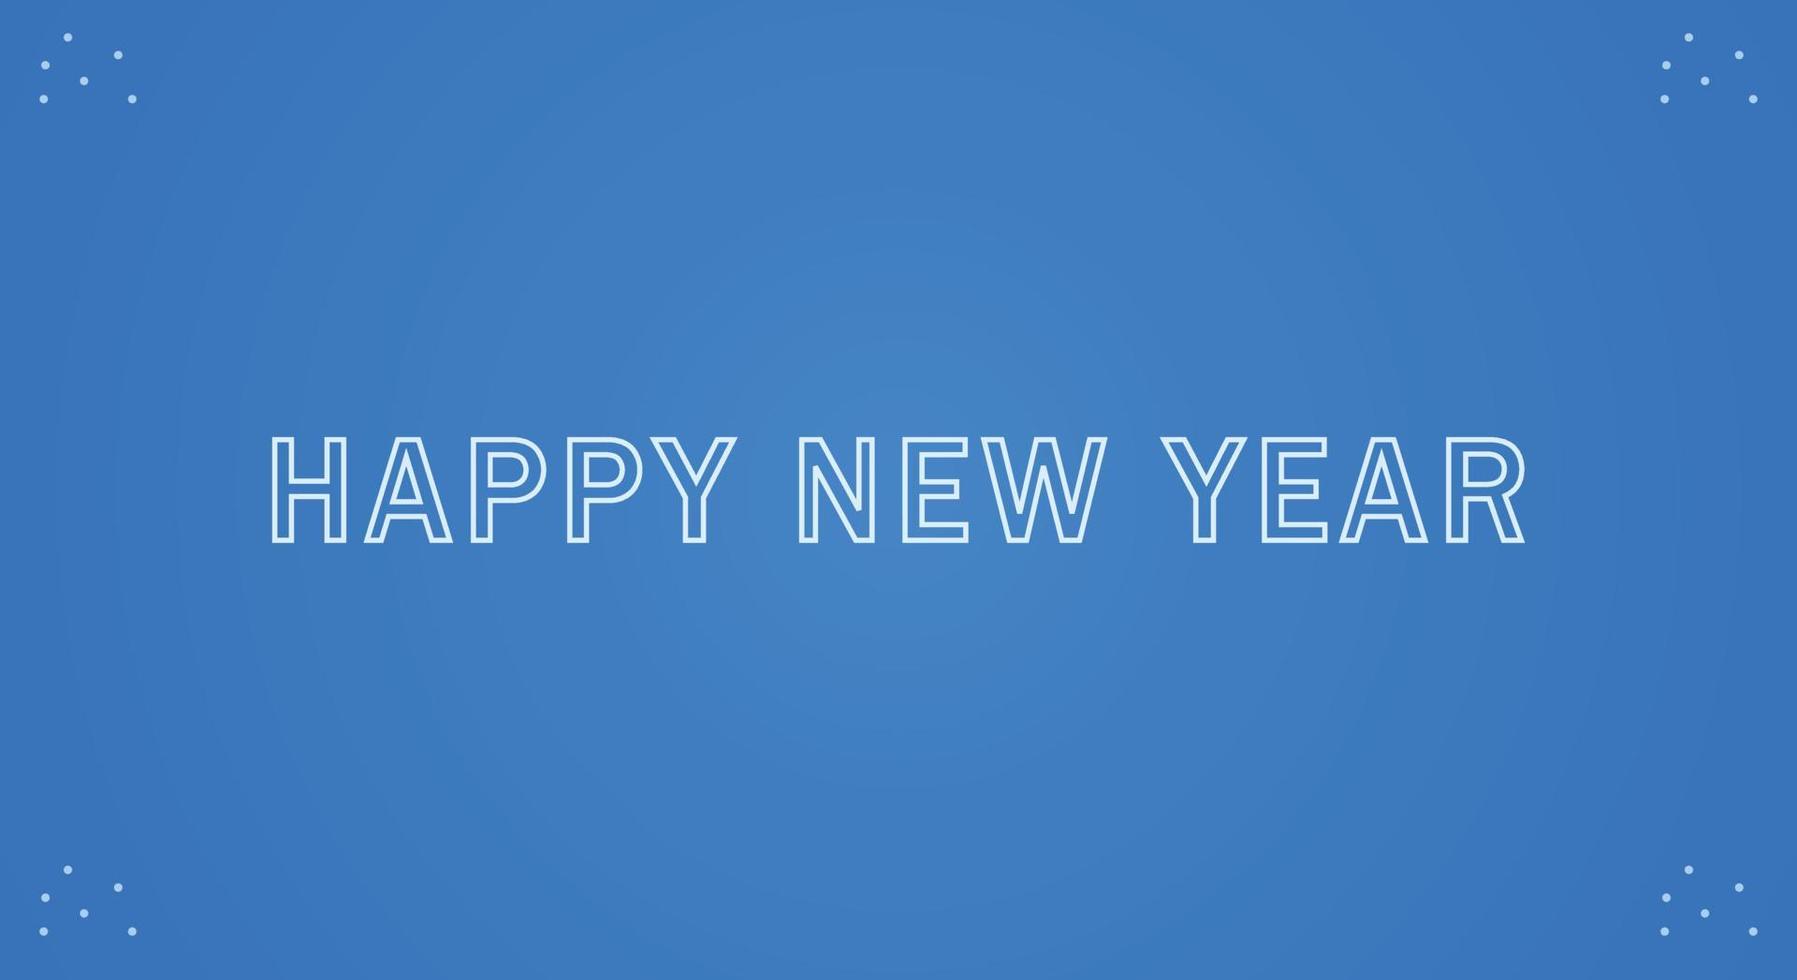 Happy New Year lettering on blue blur vector background with sparkles.